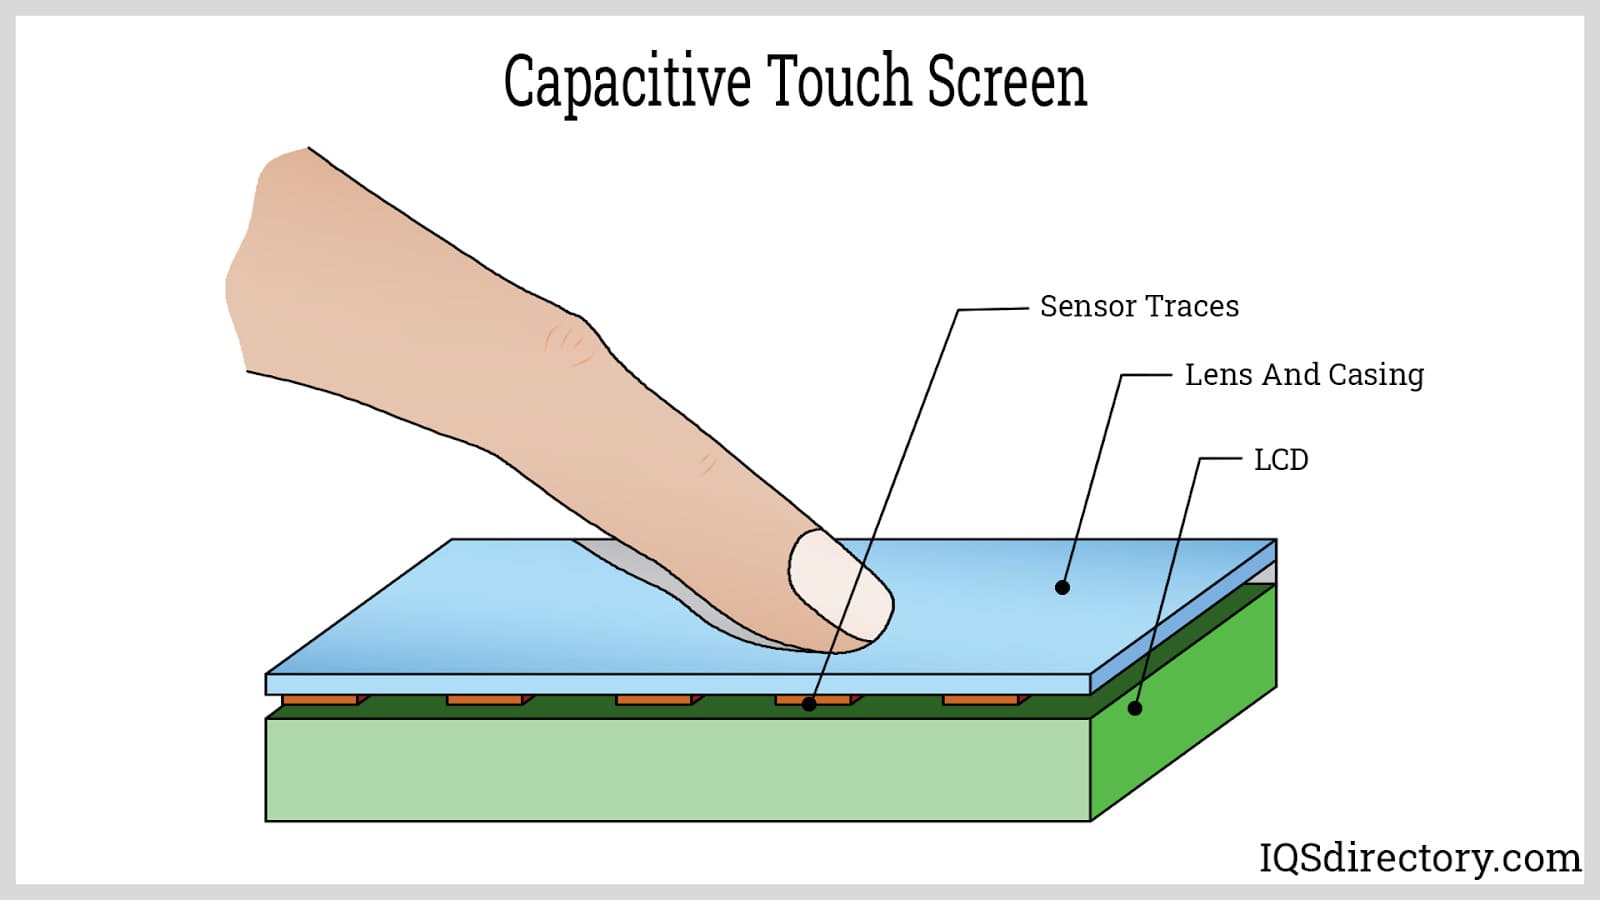 Capacitive Touch Screen: What Is It? How Does It Work?, 56% OFF